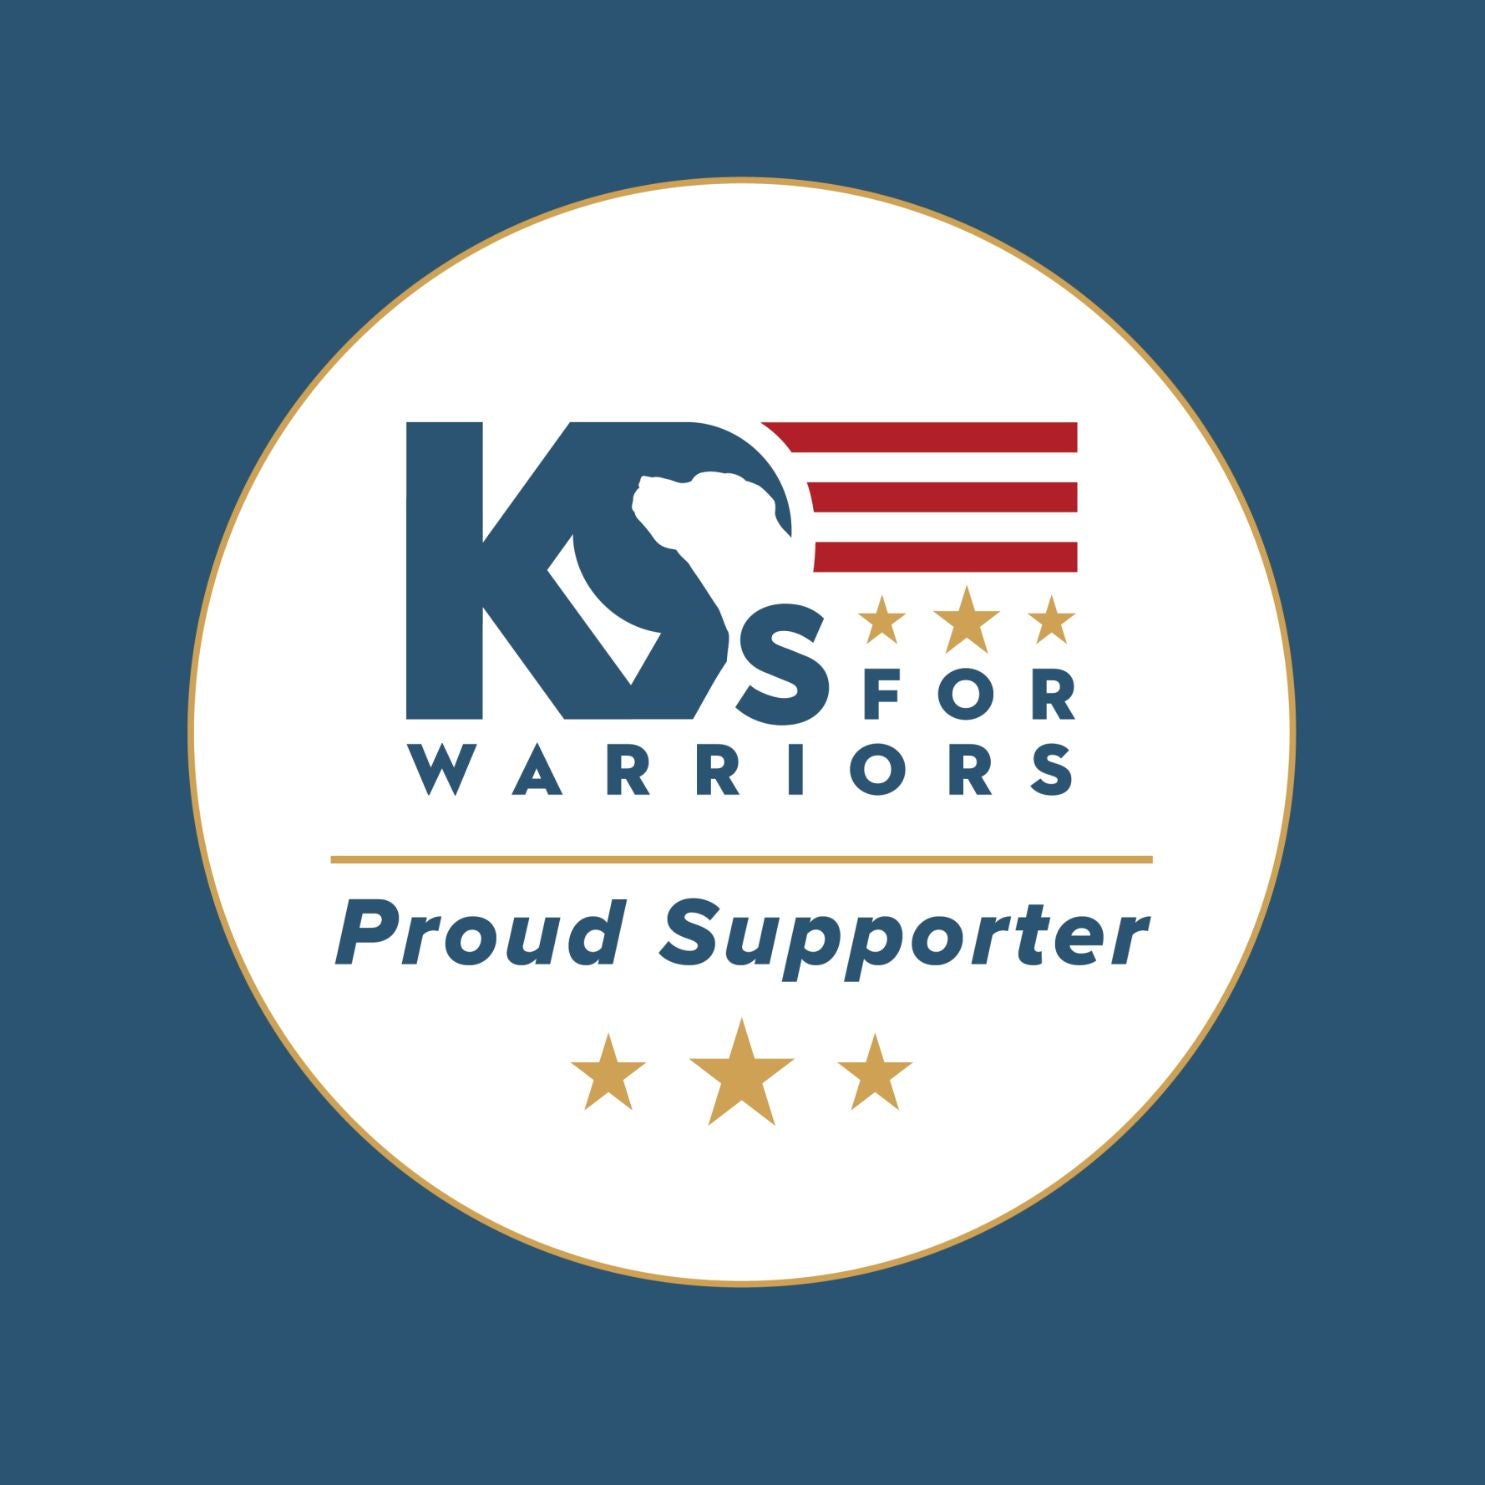 Logo of K9s for Warriors, showcasing a service dog silhouette paired with bold typography, representing the organization's commitment to pairing veterans with service dogs for support and companionship.